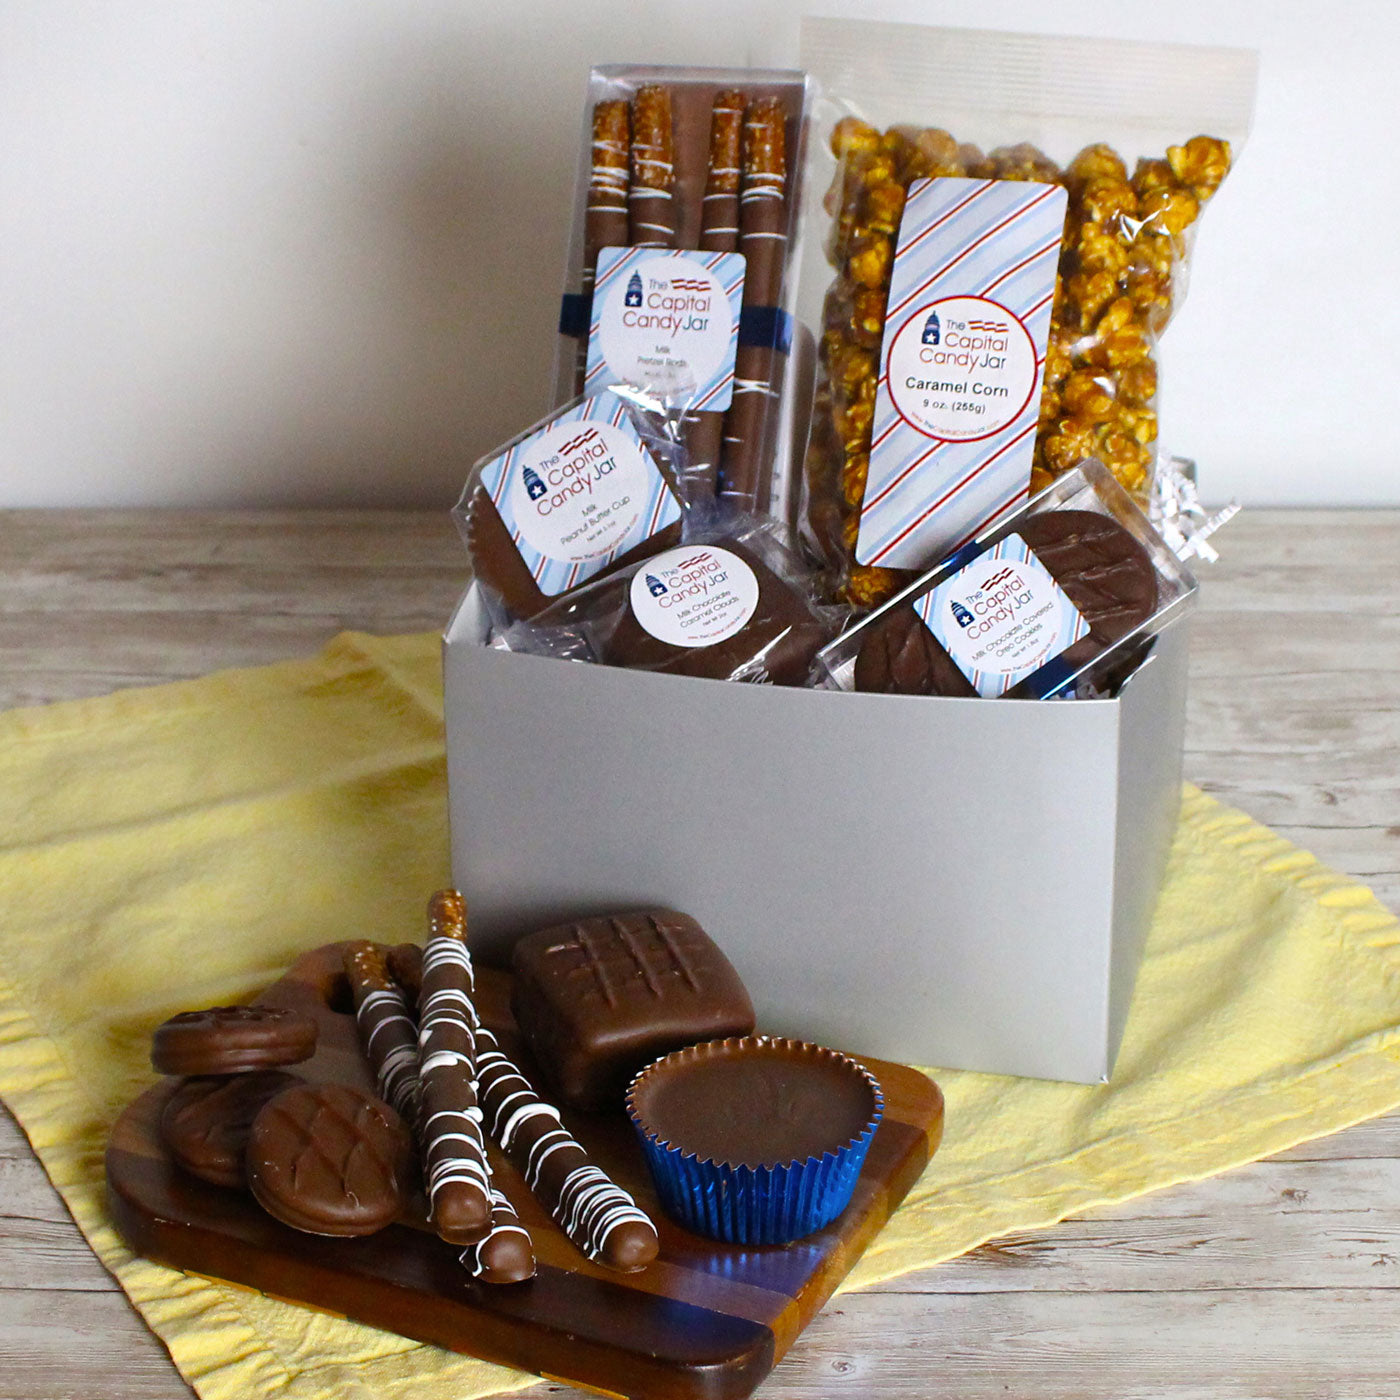 Buy our chocolate delight appreciation gift box at broadwaybasketeers.com